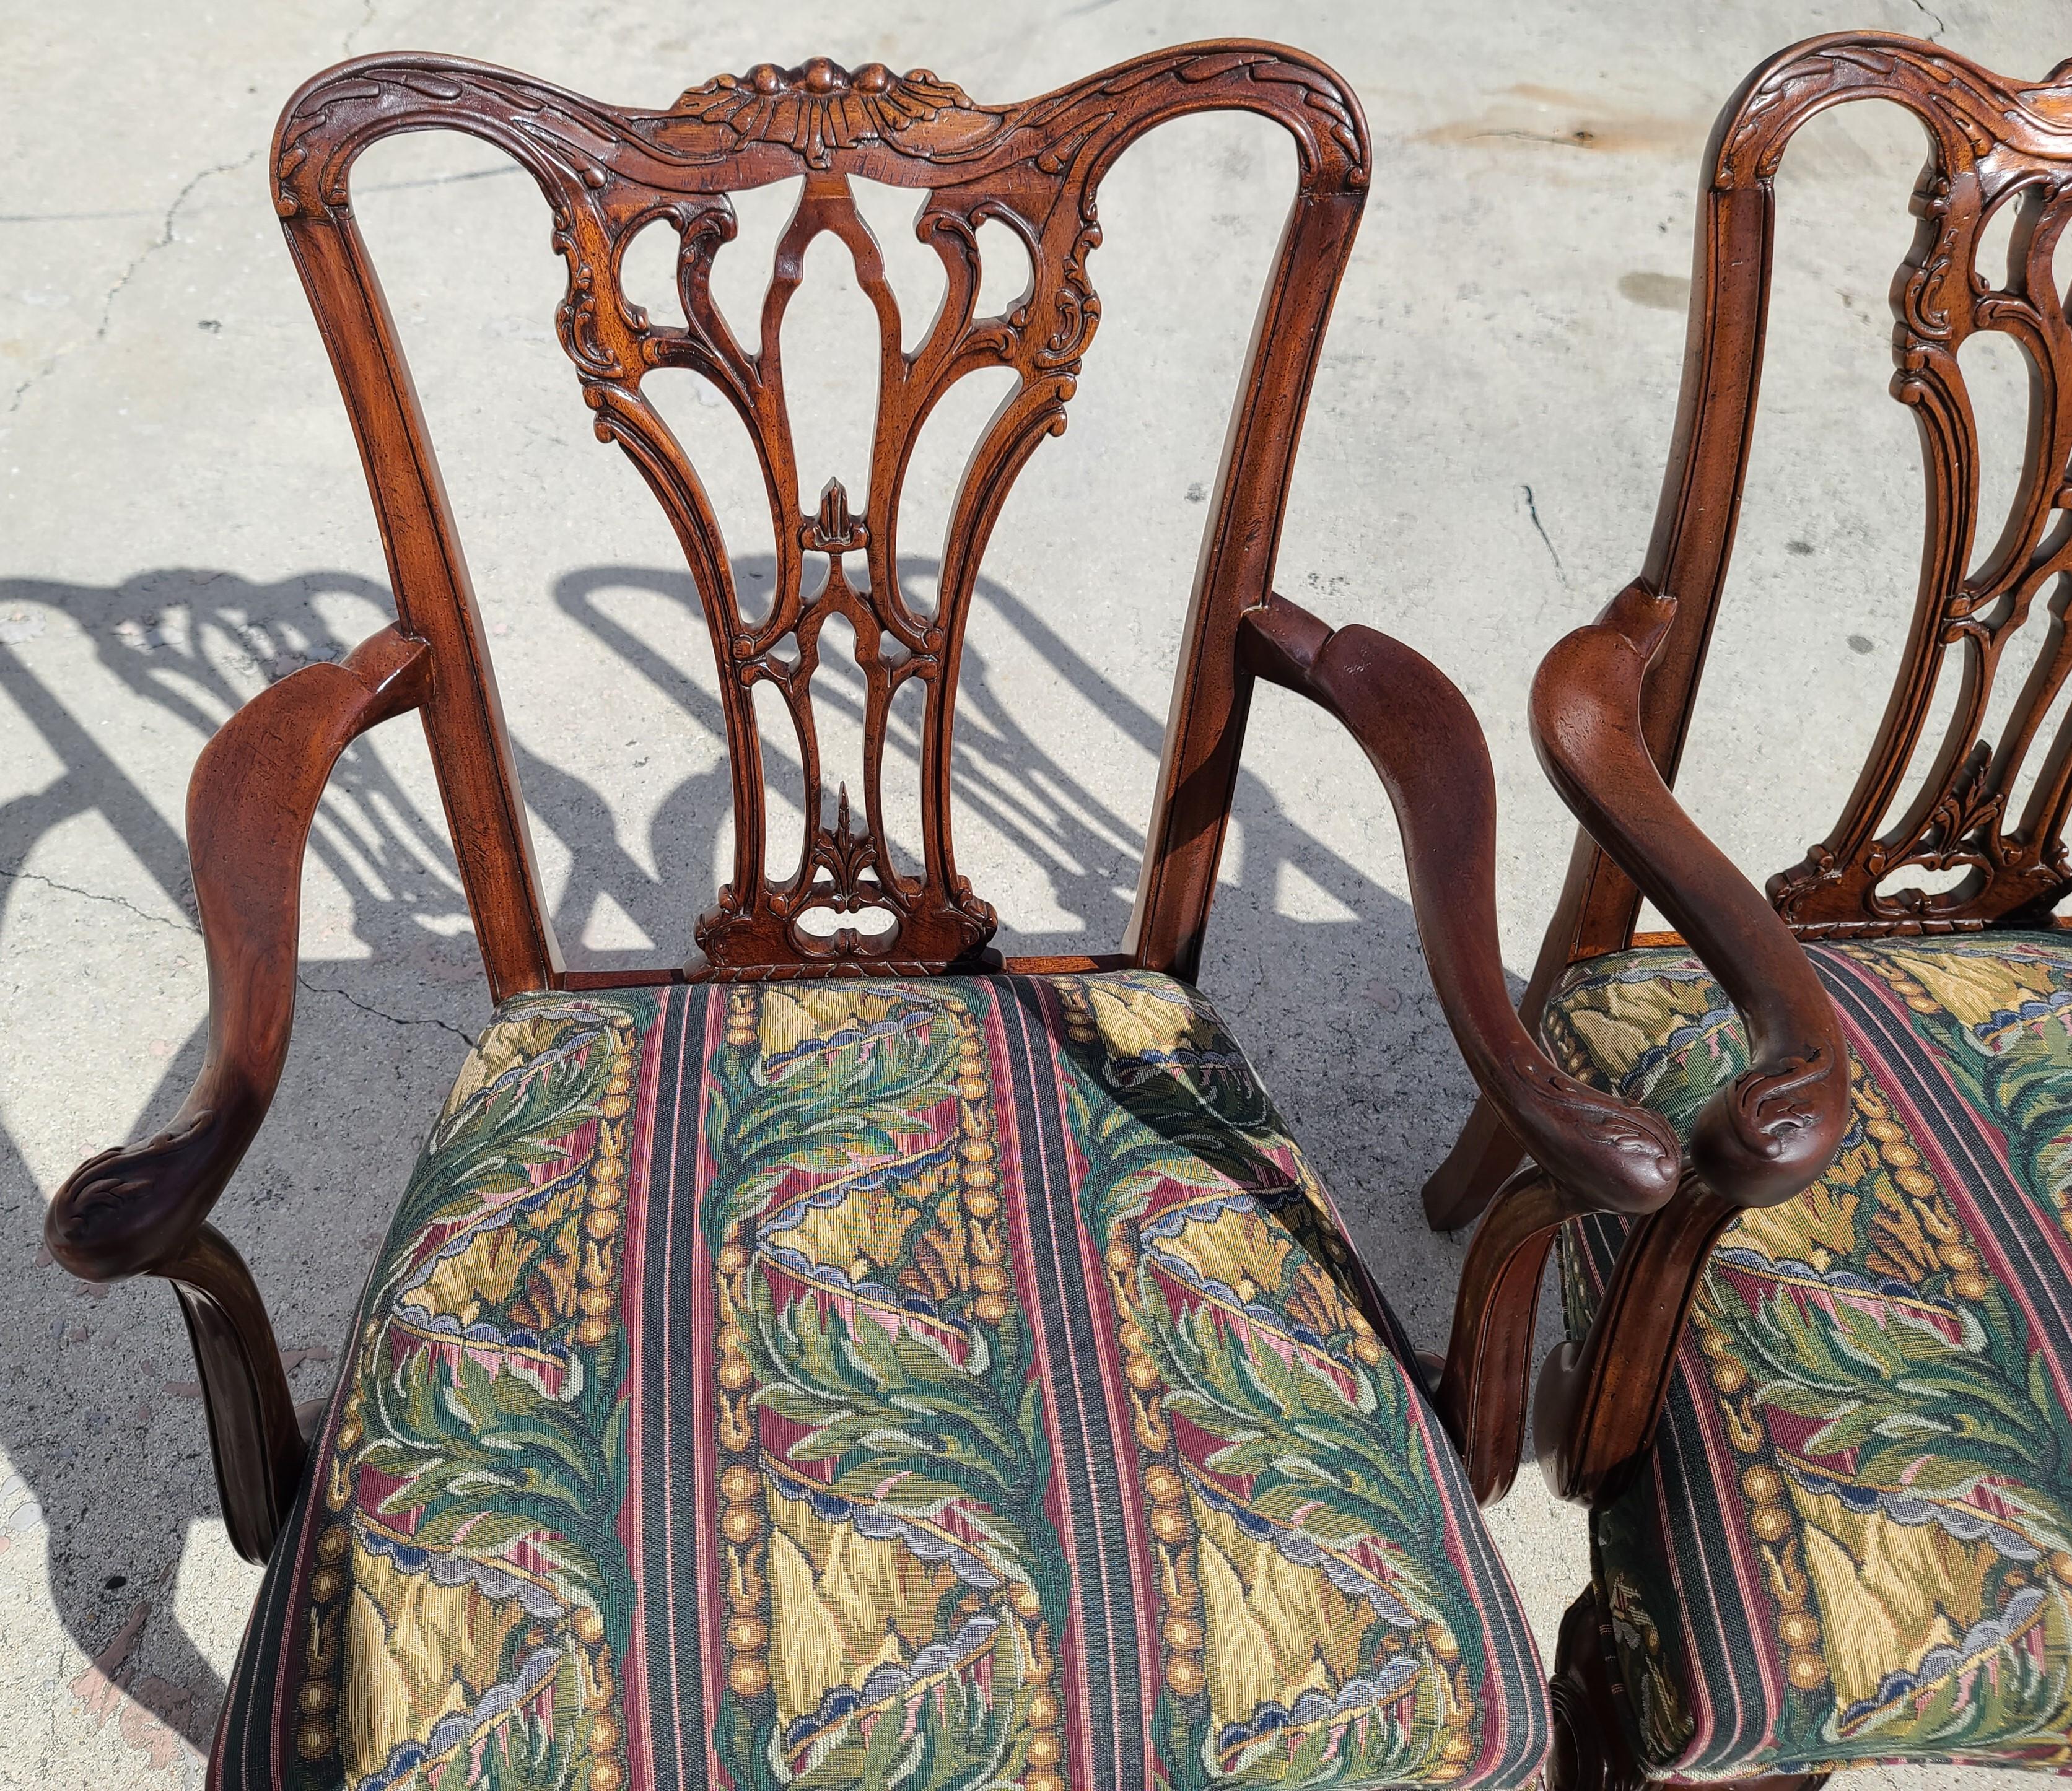 20th Century Antique C 1900 Edwardian Chippendale Mahogany Ball & Claw Armchairs, a Pair For Sale